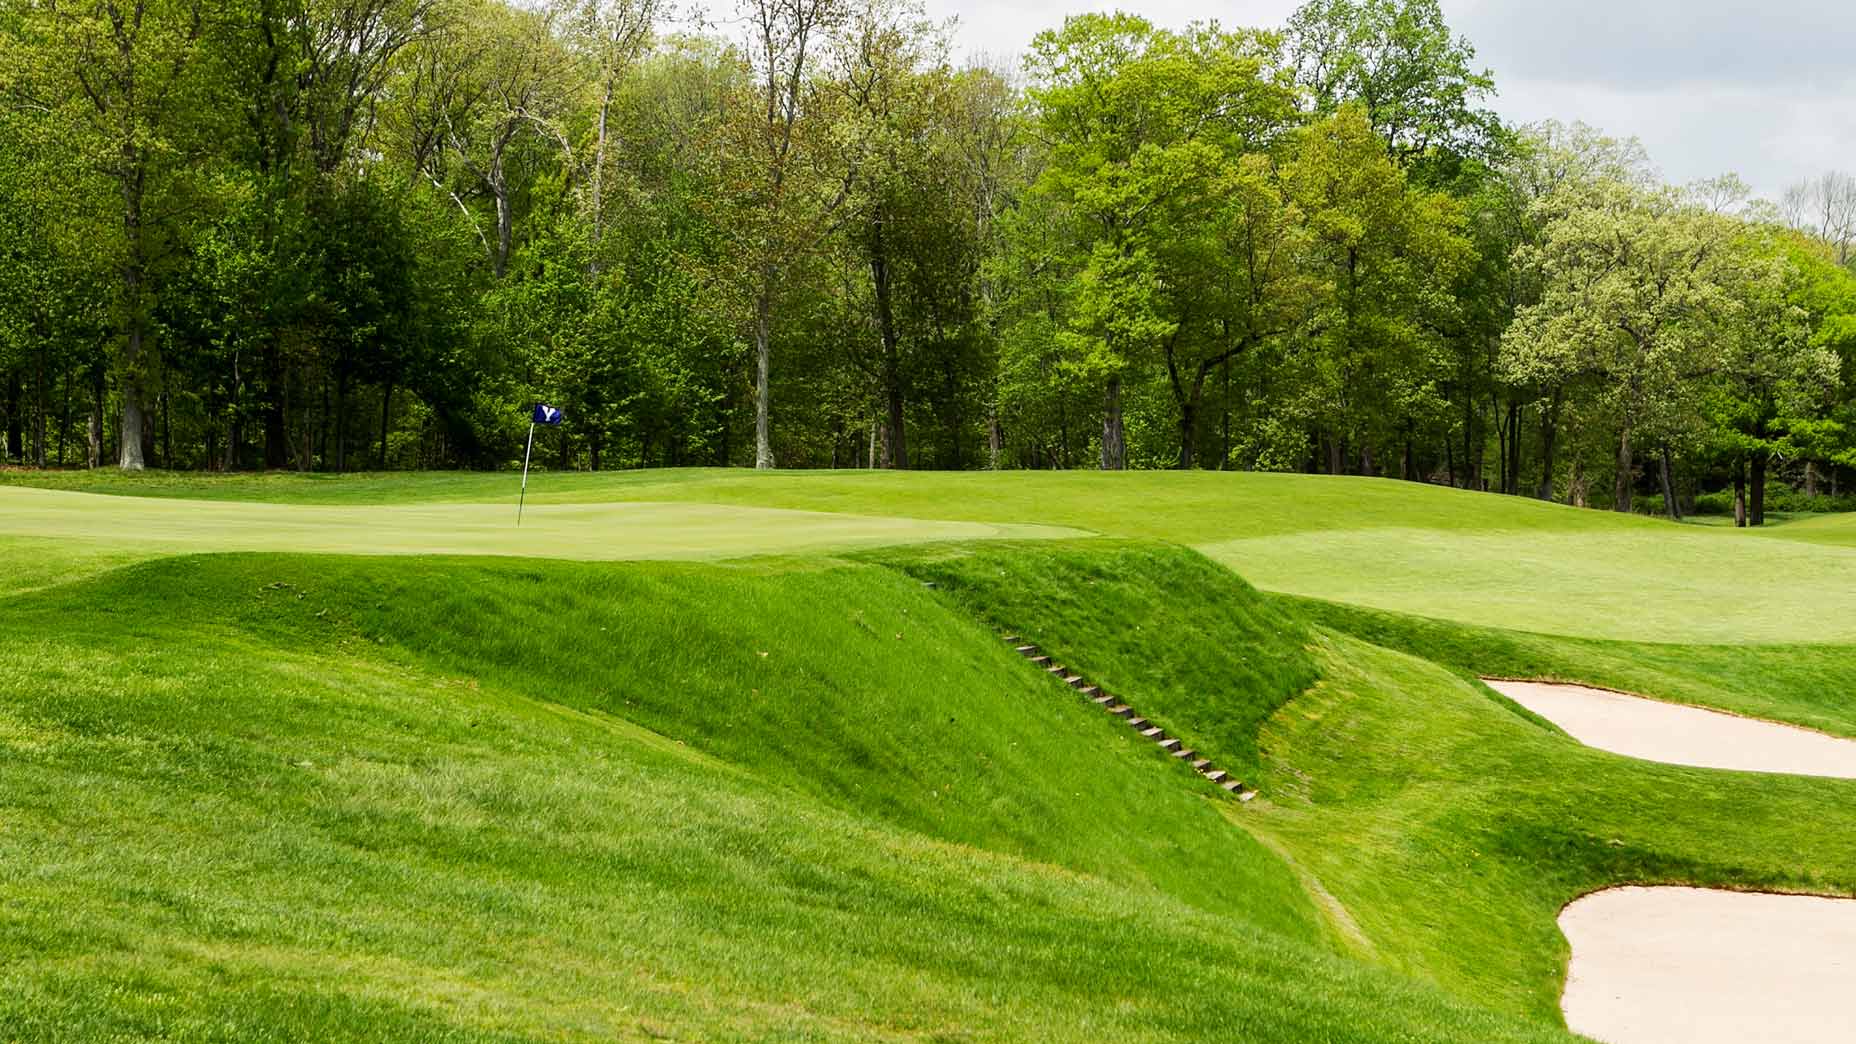 Best golf courses in Connecticut, according to GOLF Magazine’s expert course raters